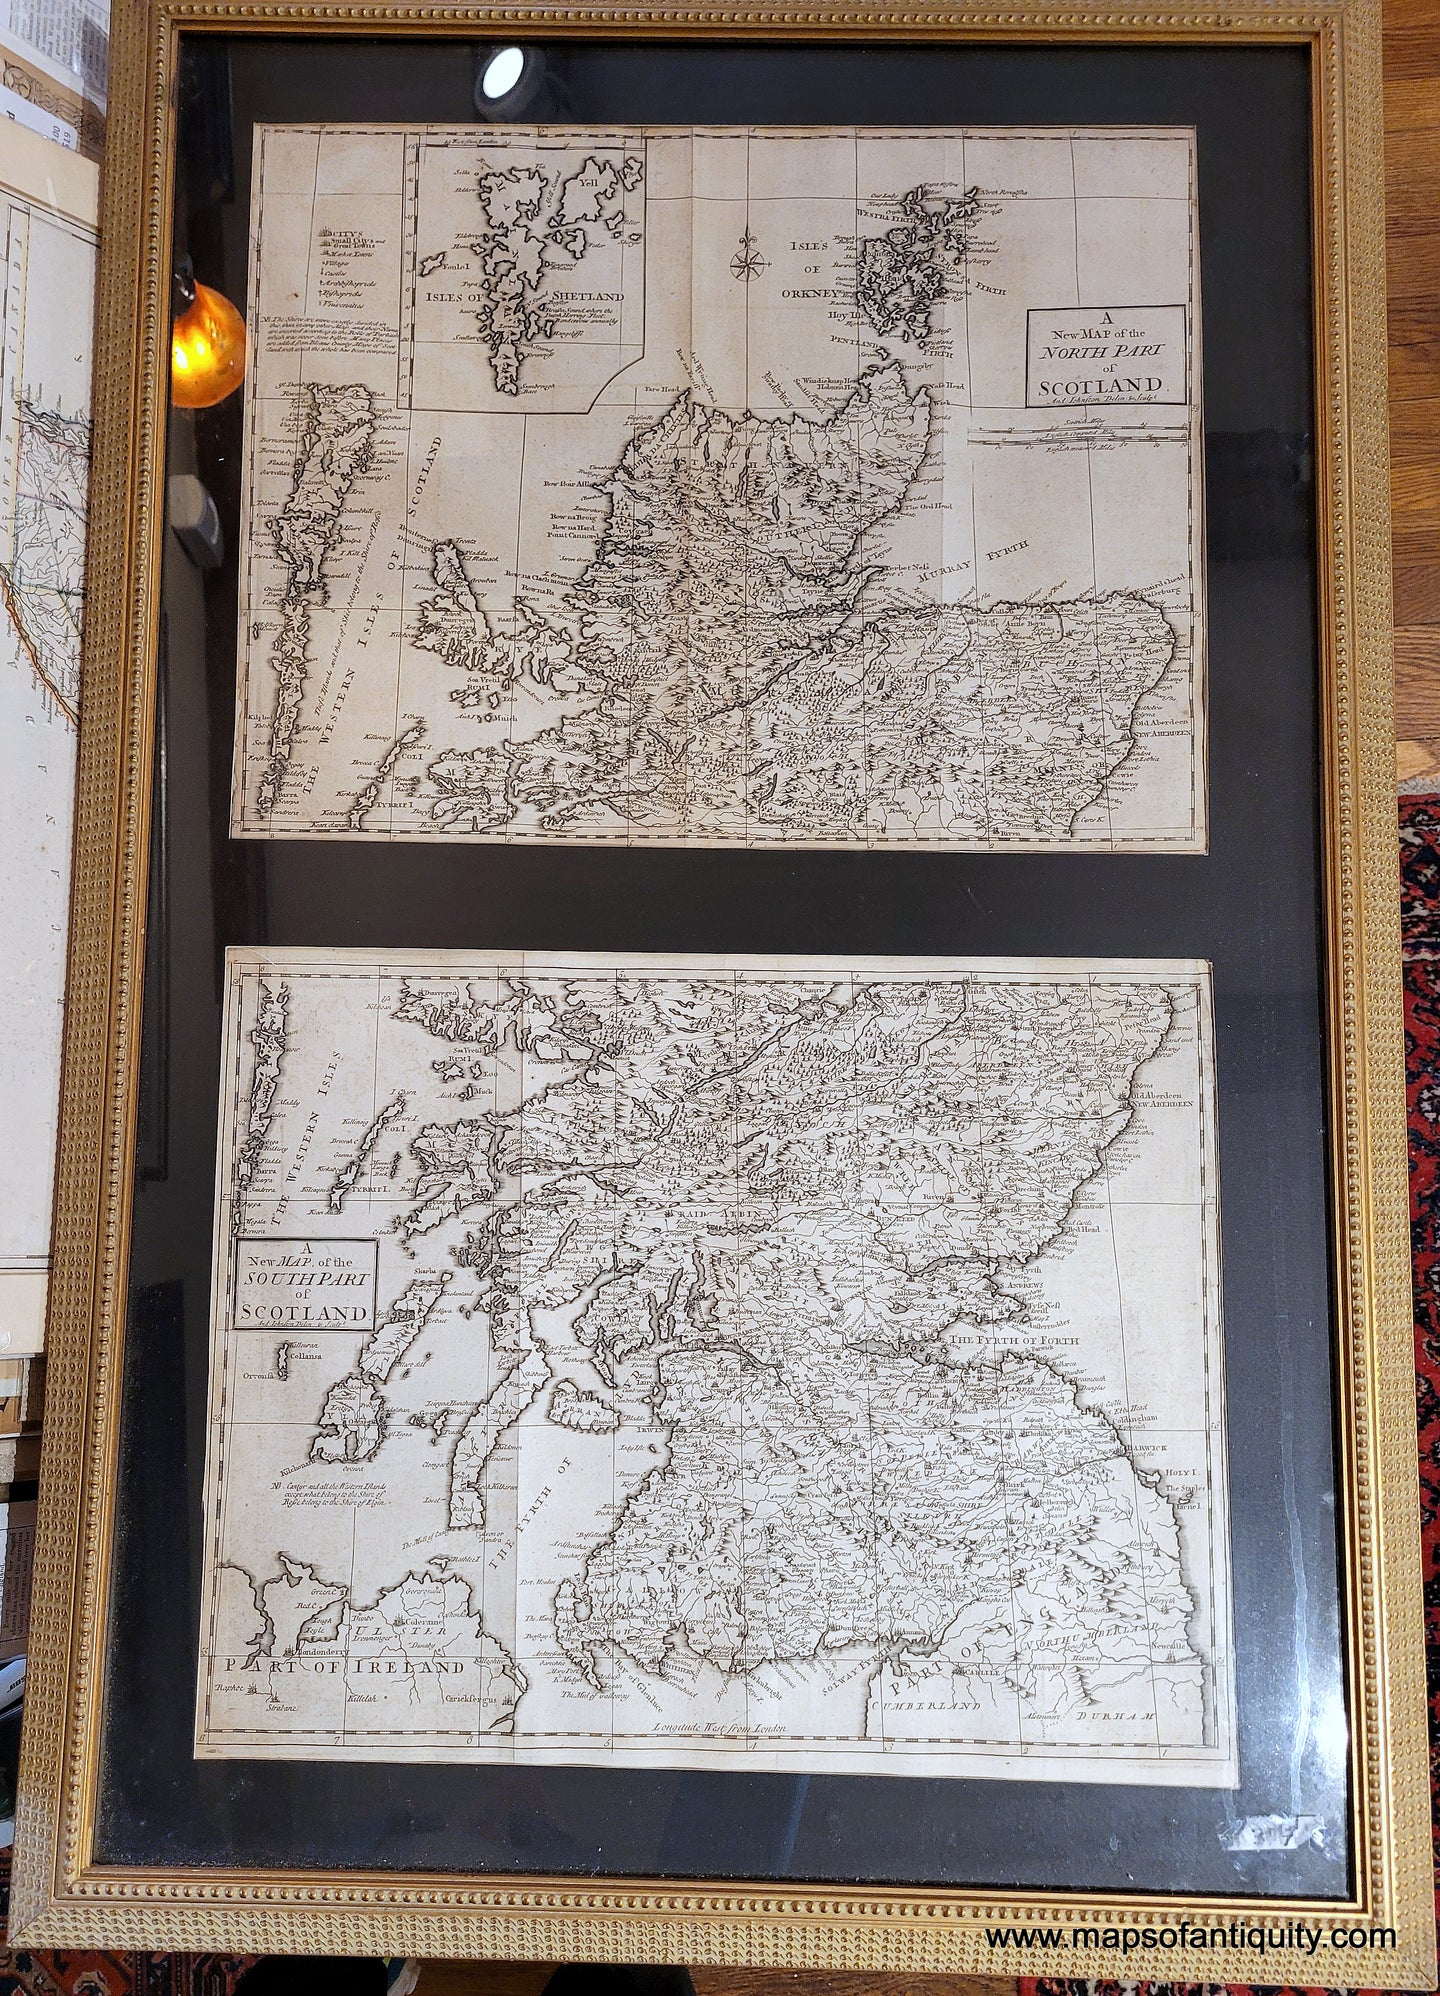 Genuine-Antique-Framed-Maps-A-New-Map-of-the-North-Part-of-Scotland-and-A-New-Map-of-the-South-Part-of-Scotland-c-1753-Johnston-Maps-Of-Antiquity